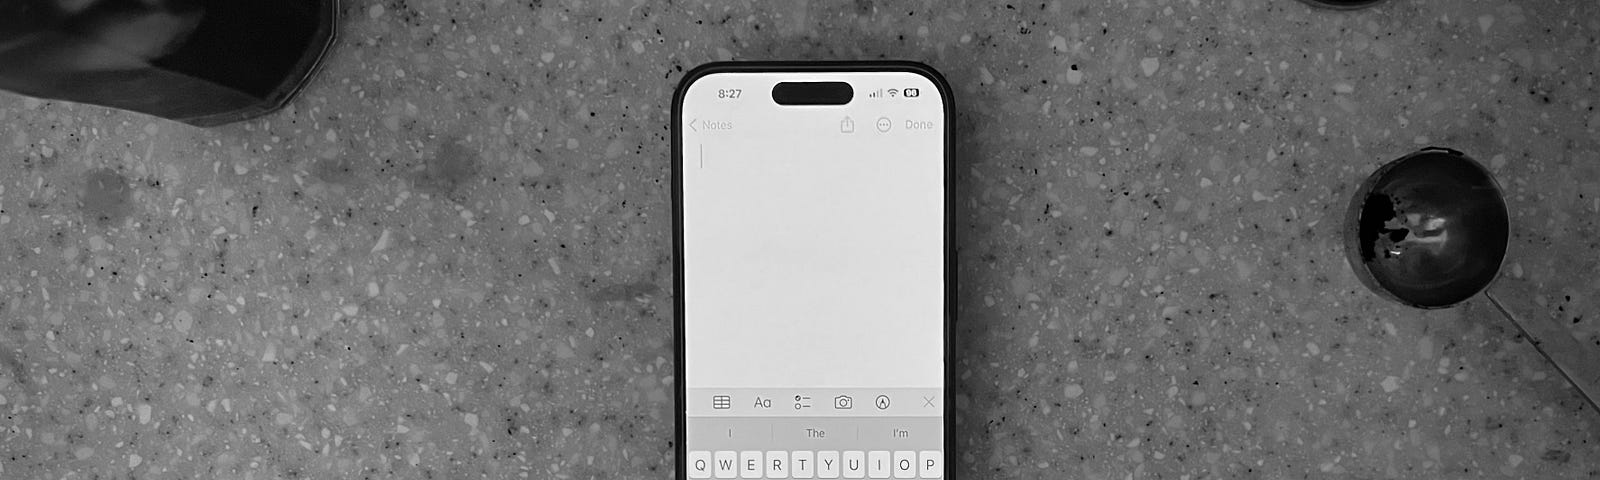 iPhone 14 Pro showing blank note with iOS Keyboard surrounded by coffee grounds and coffee tools on kitchen counter.